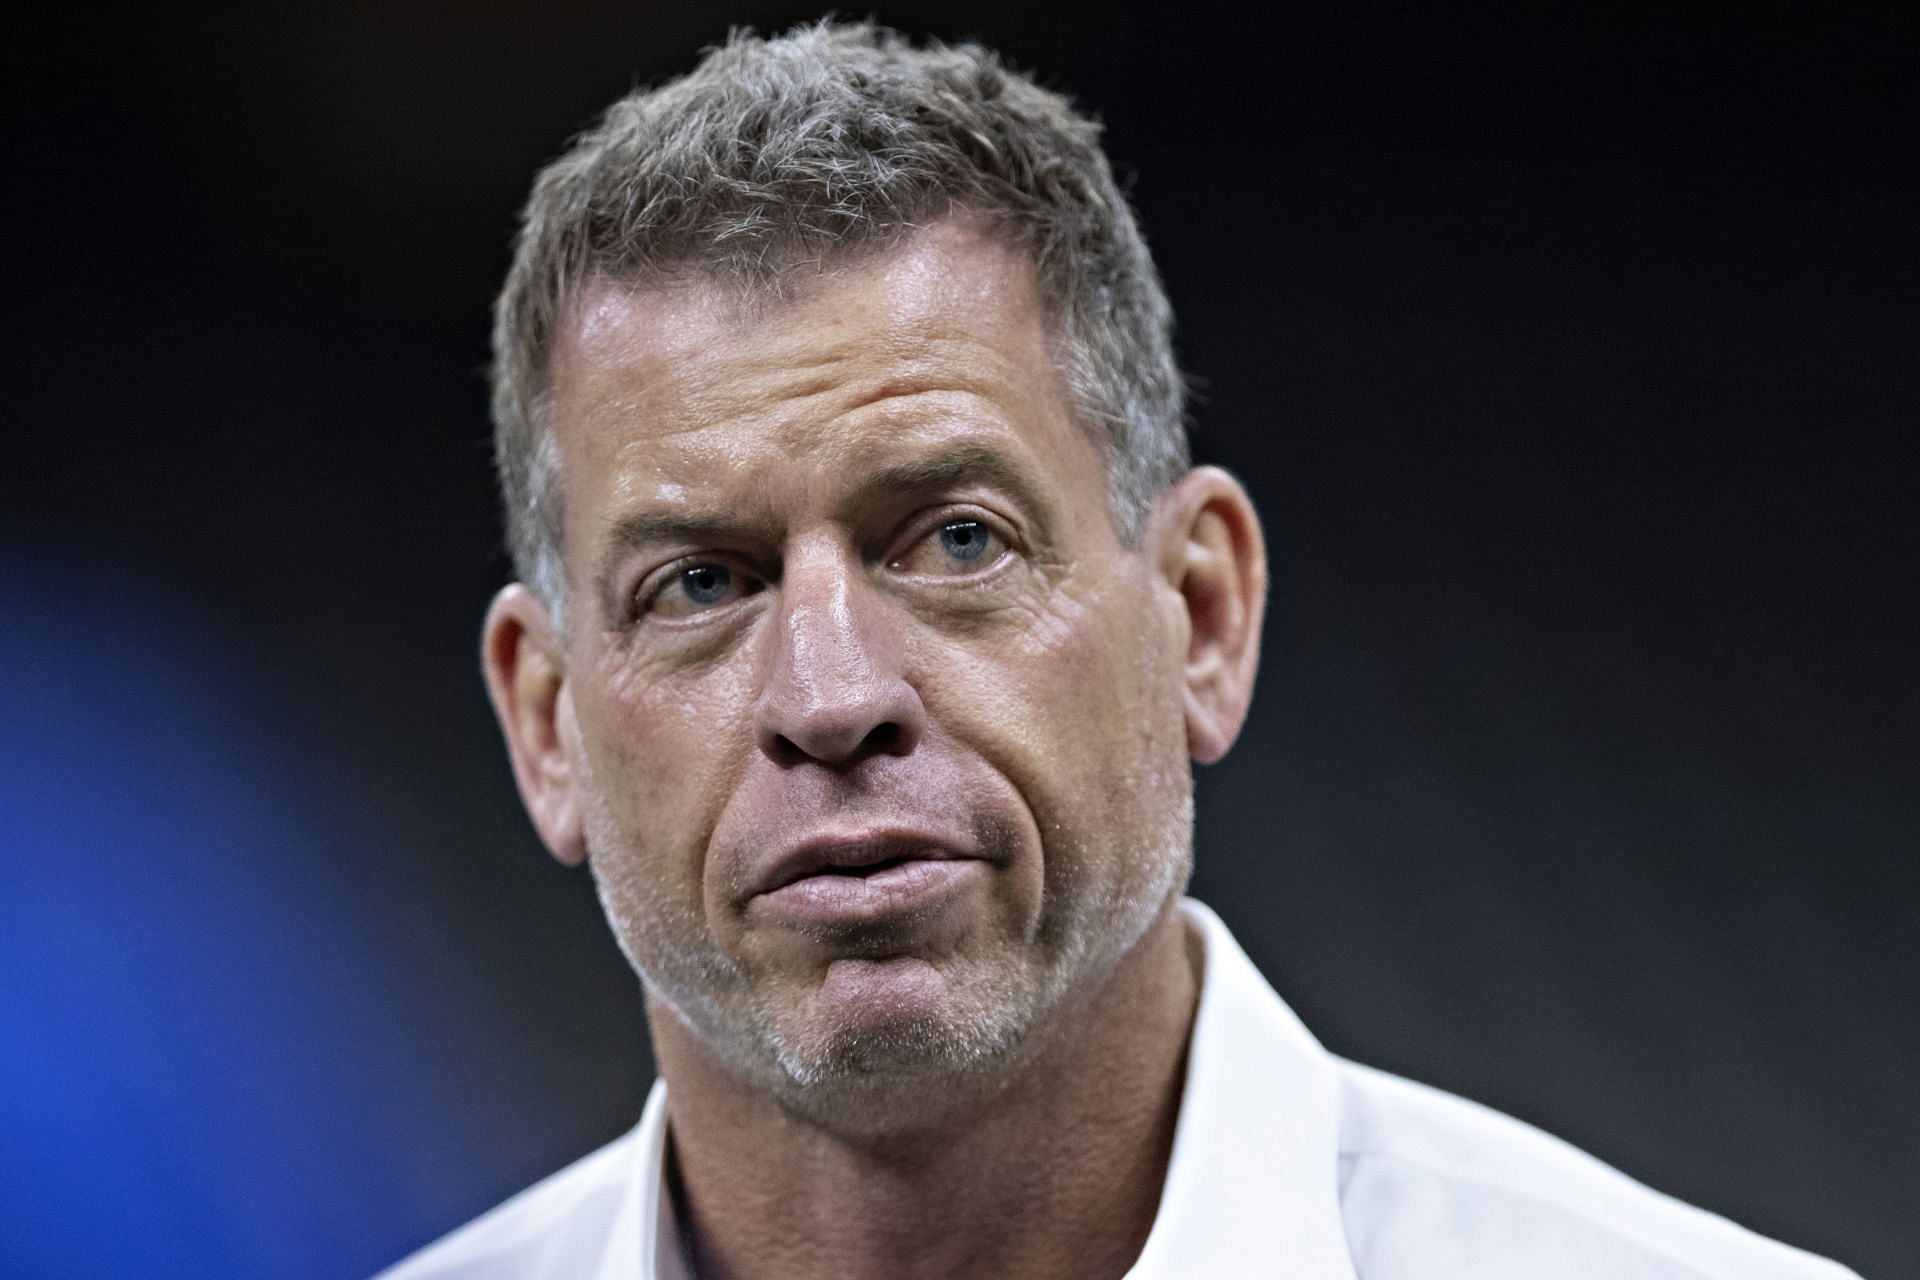 Broadcaster and former quarterback Troy Aikman